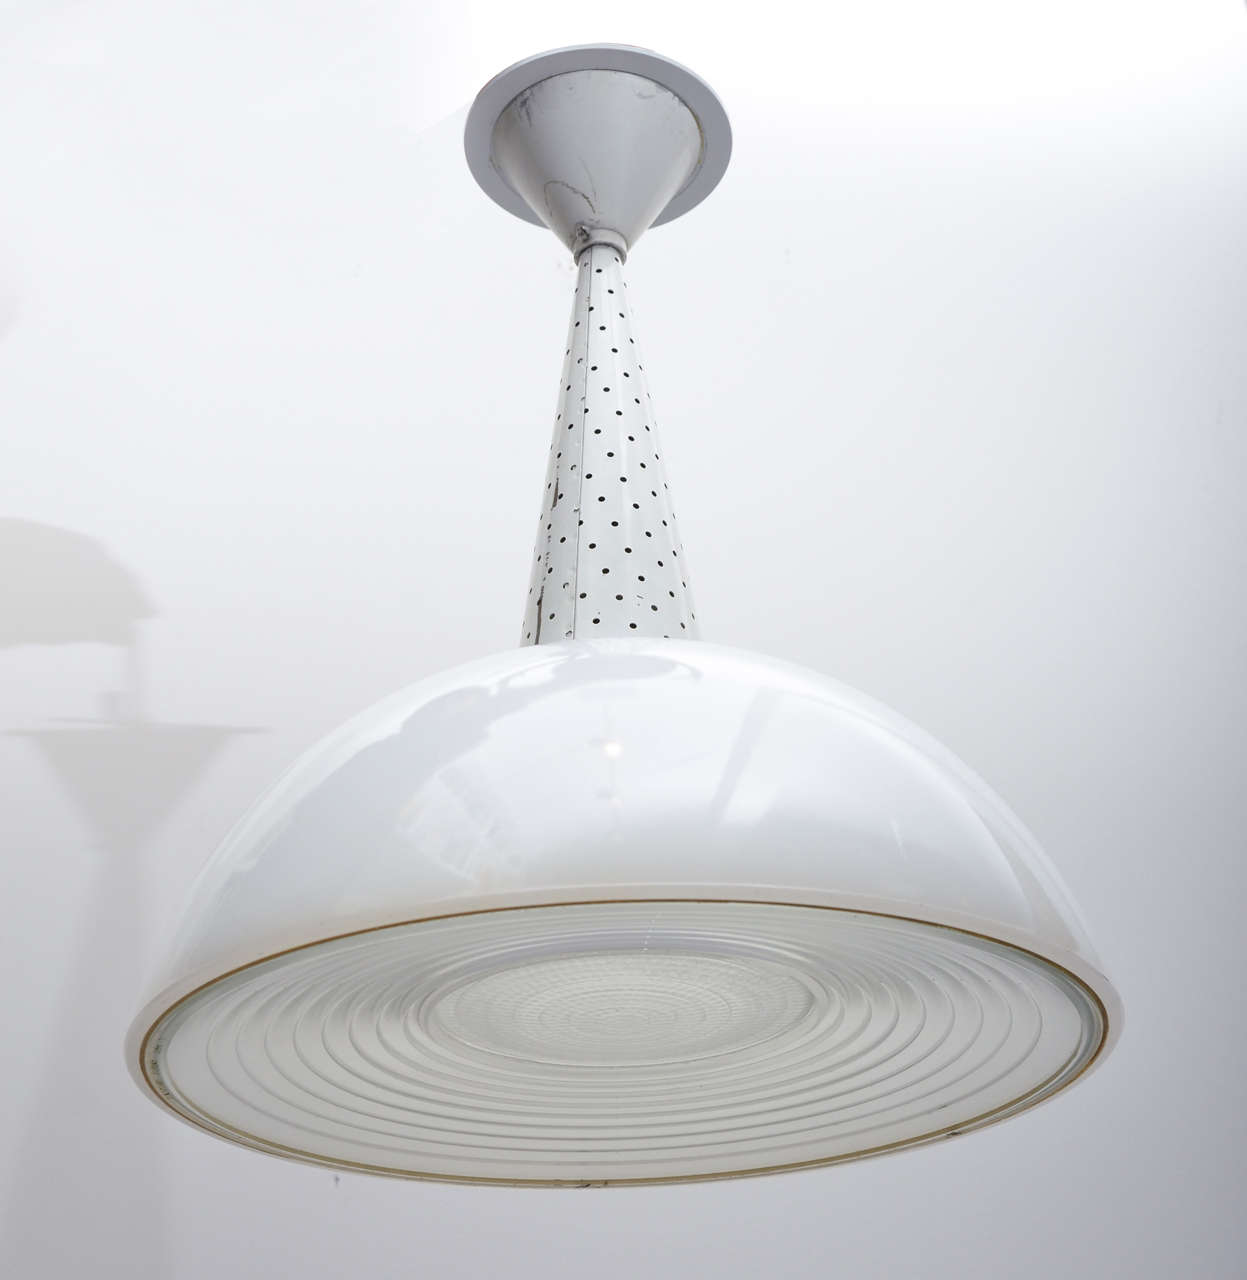 Newly rewired ceiling light fixture in the manner of Matheieu Mategot  - white perforated metal stem with milk glass shade with translucent glass on the bottom - in the center is a removable glass lense.